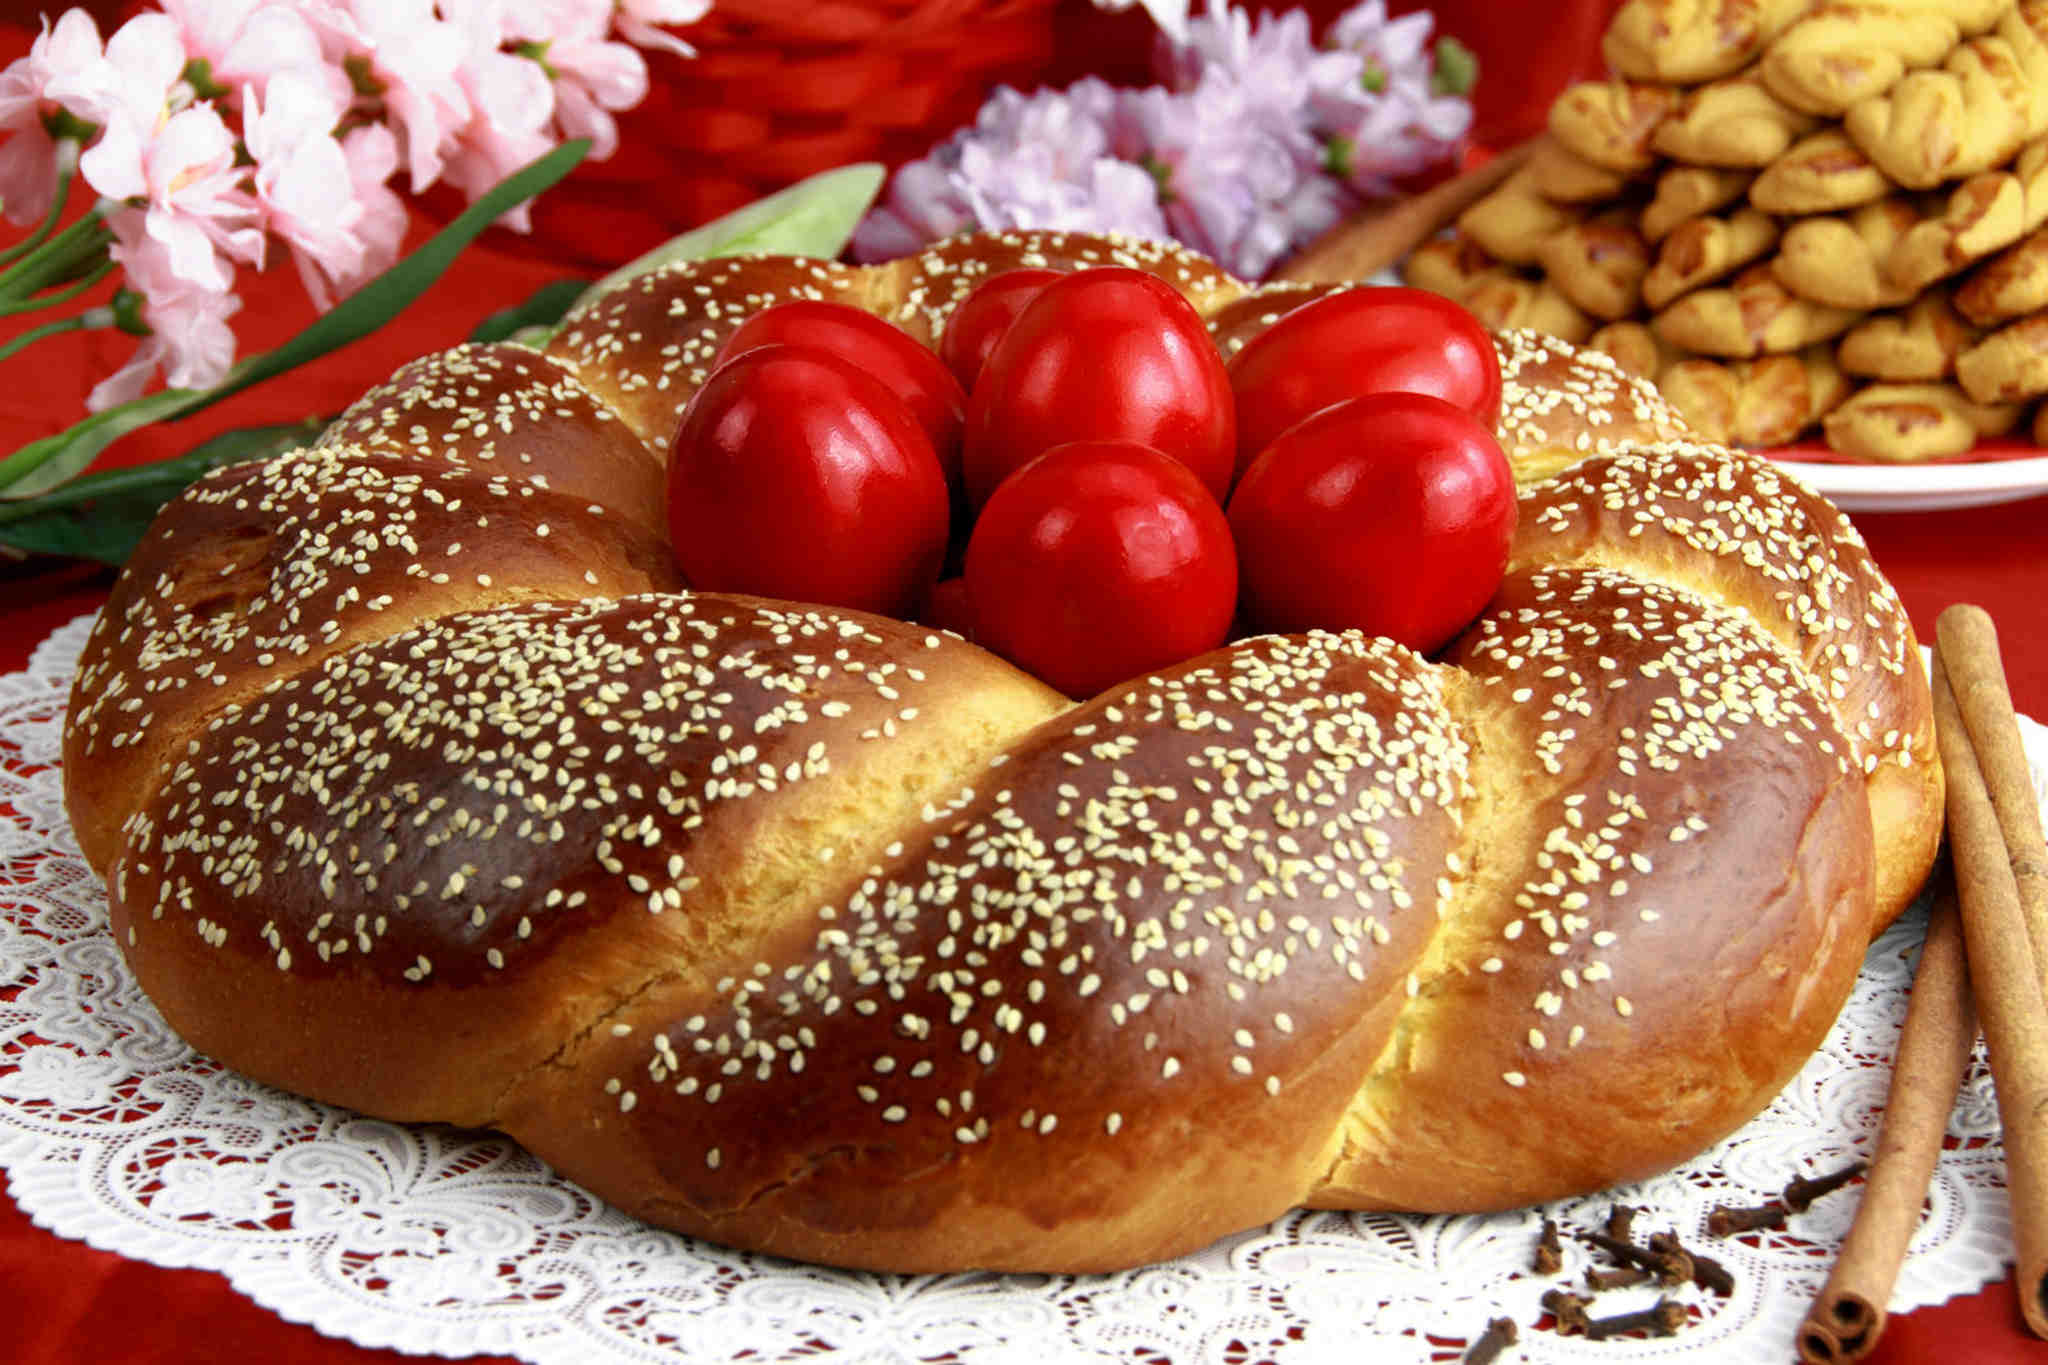 Orthodox Easter at the Mistral